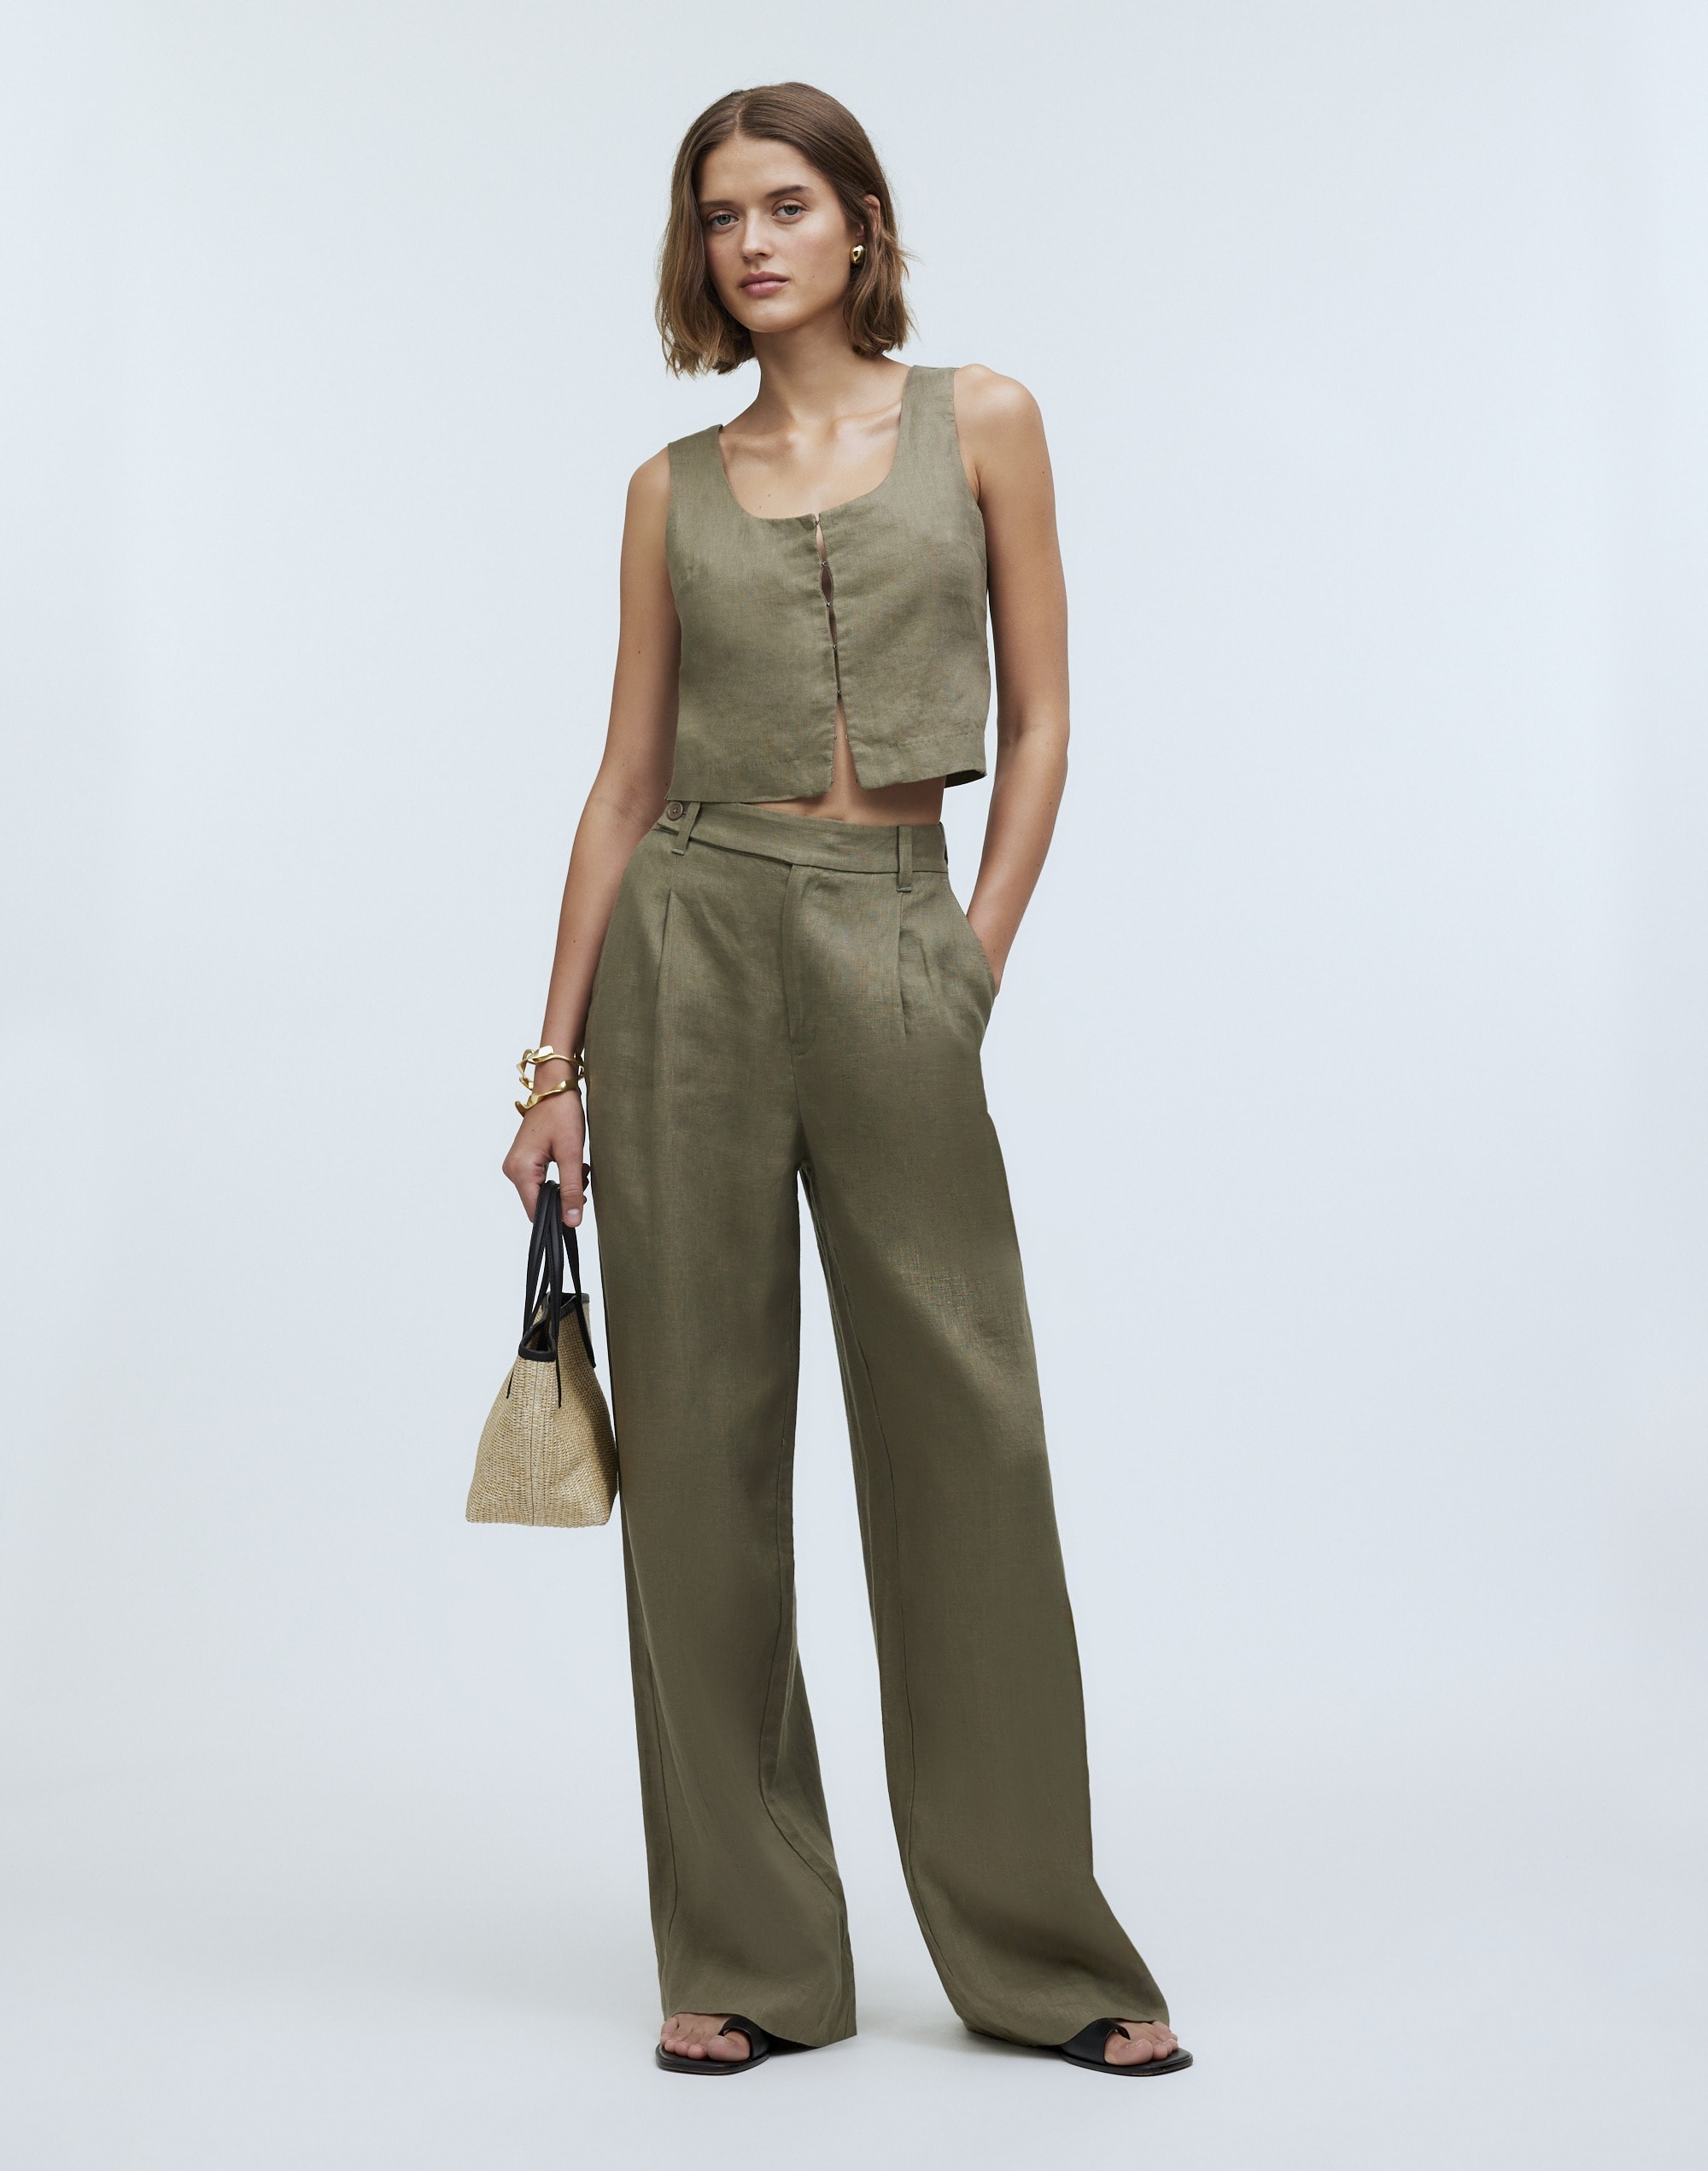 The Petite Harlow Wide-Leg Pant in 100% Linen